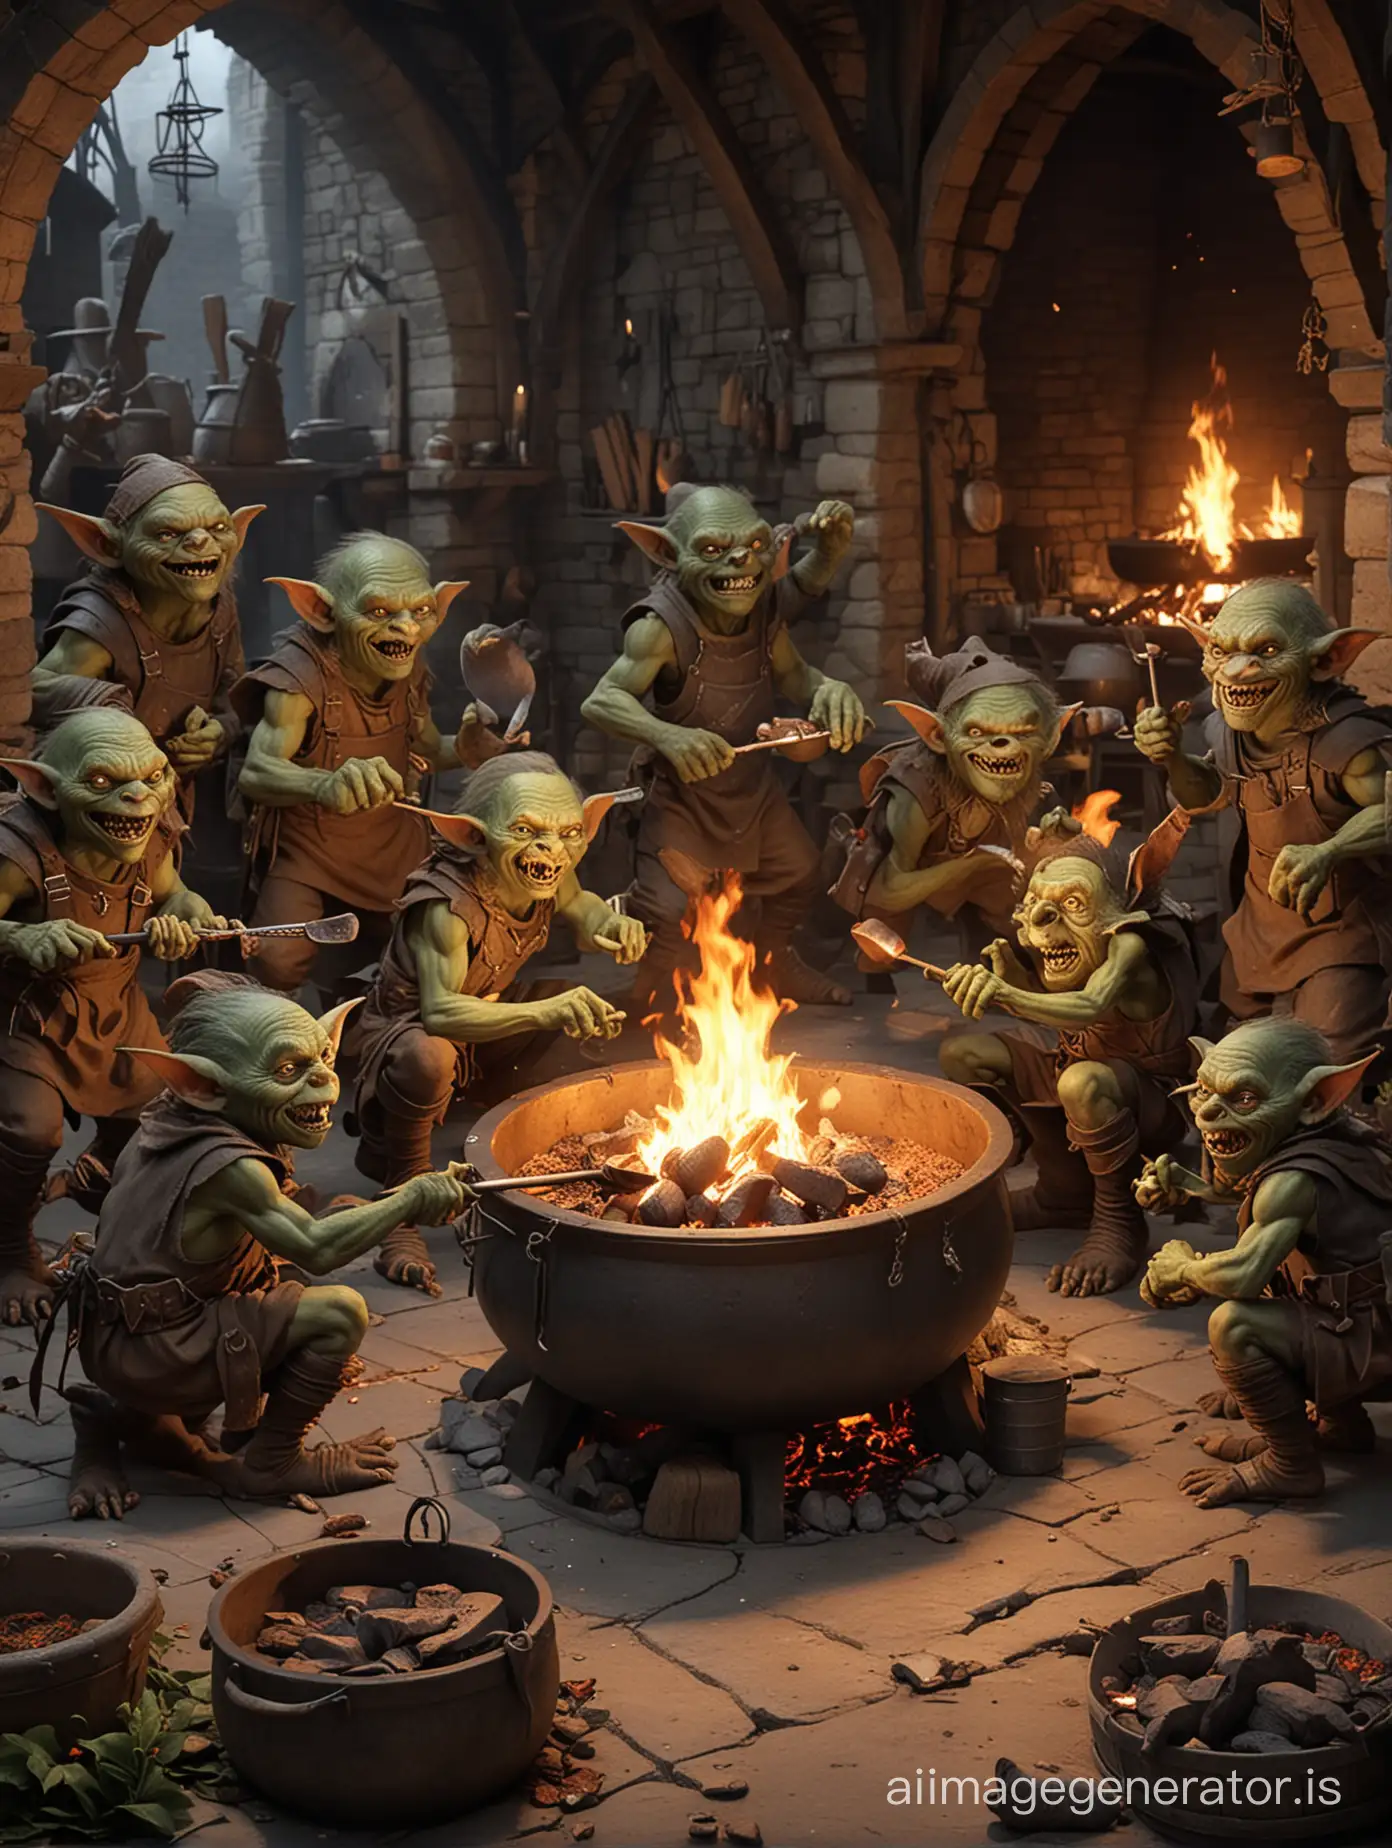 Goblin-Gathering-Feast-Preparation-at-a-Rustic-Dining-Hall